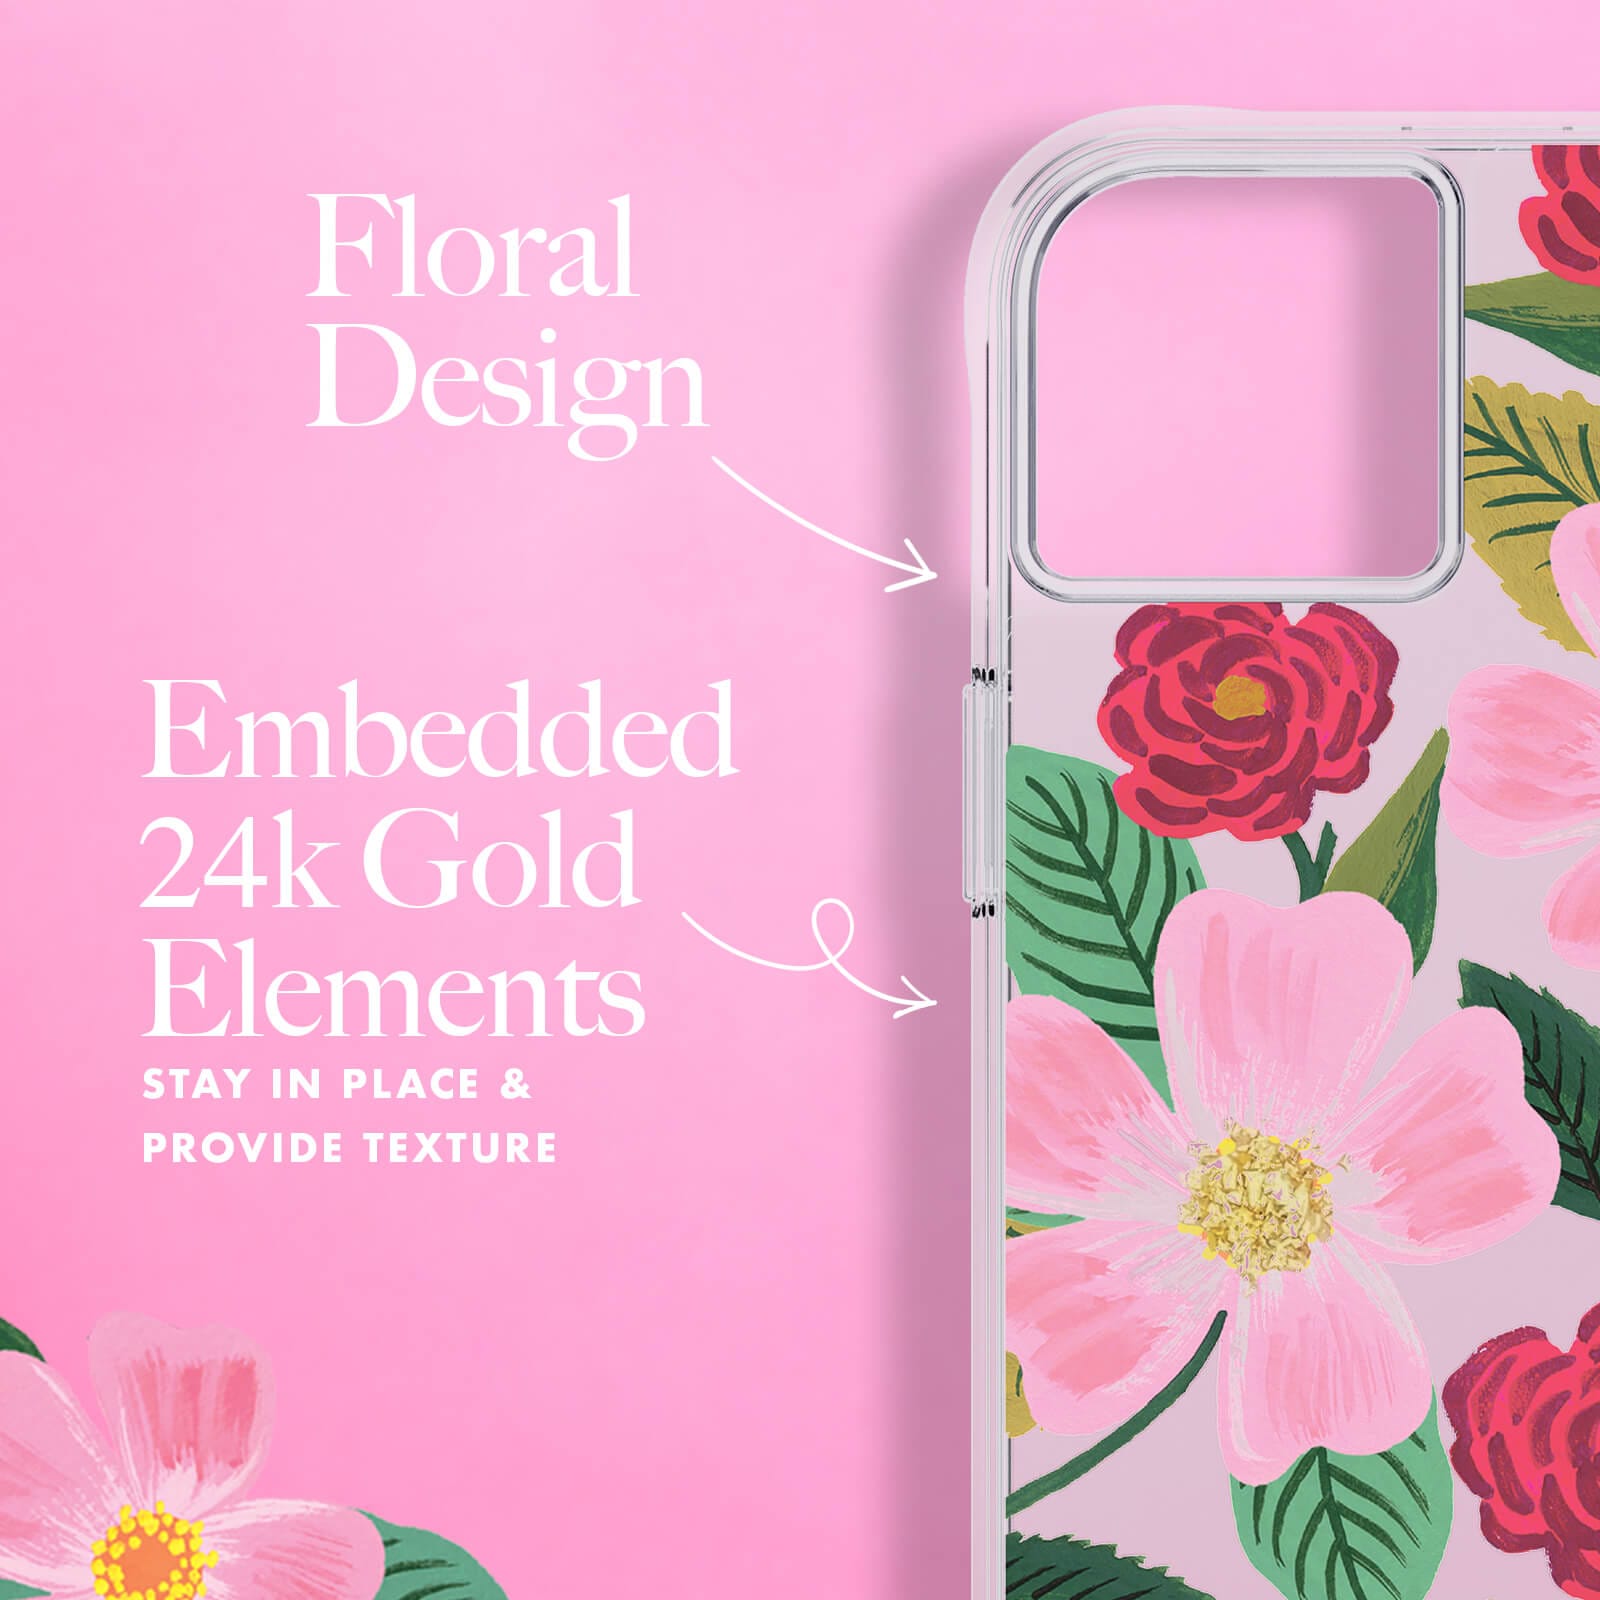 Floral design. embedded 24k gold elements stay in place & provide texture. color::Rose Garden